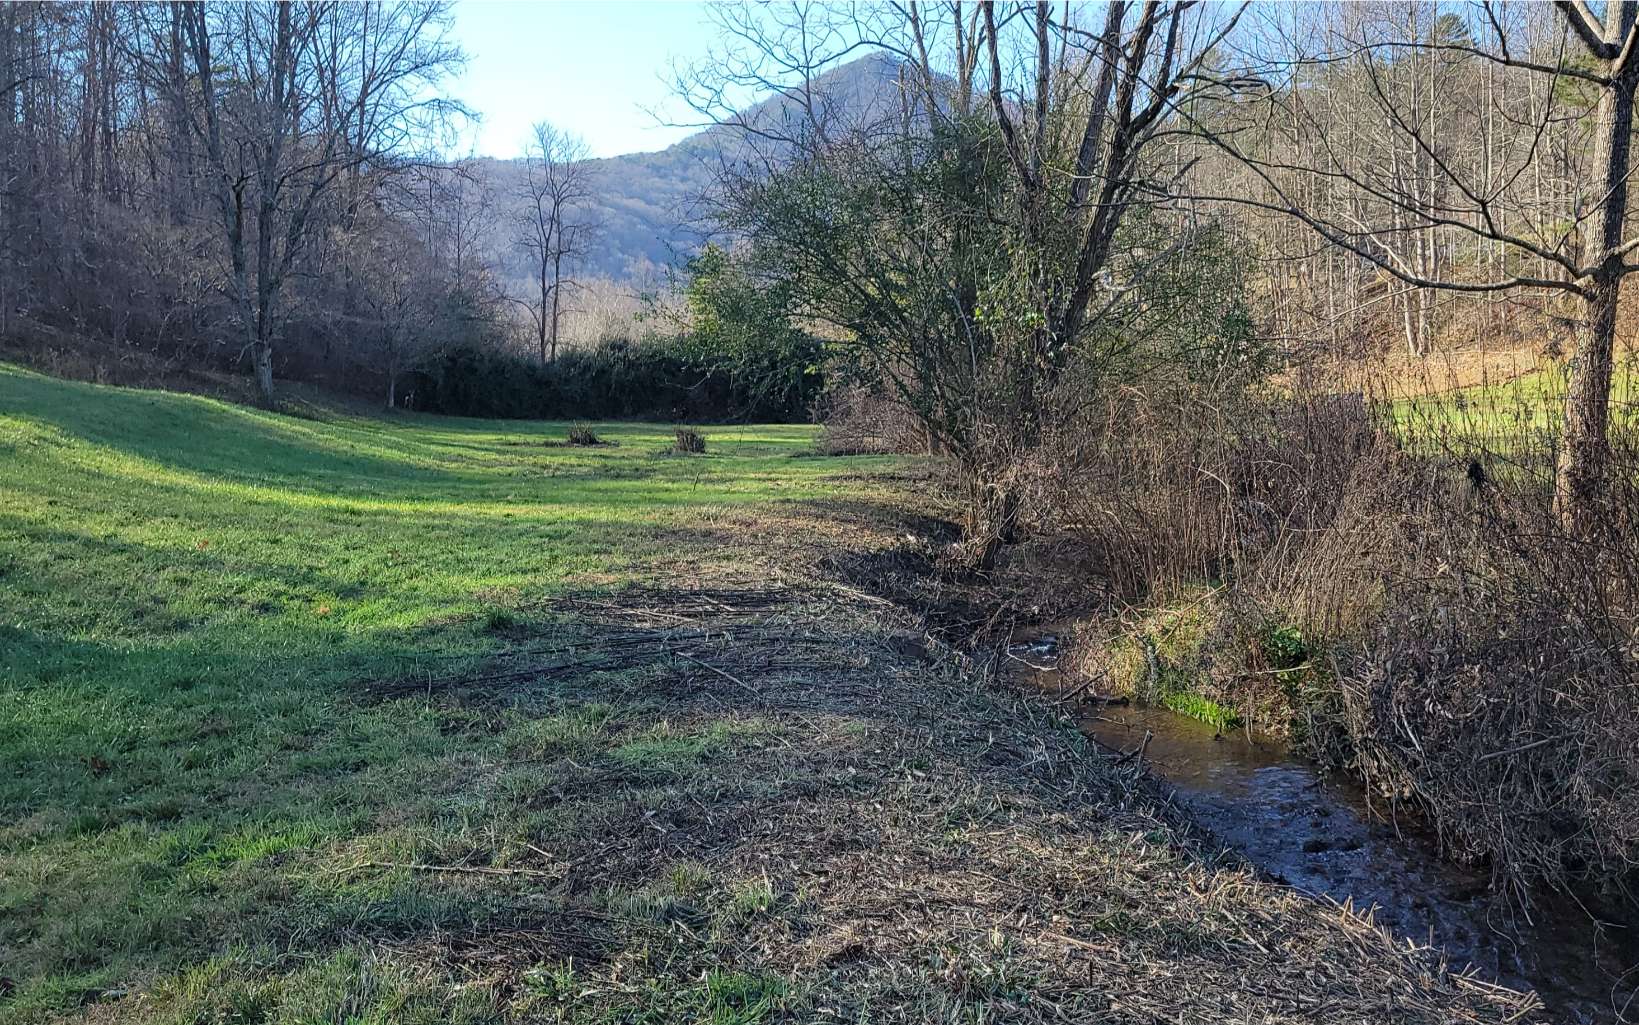 Build your dream home in the North Georgia Mountains! Beautiful building lot on small creek with about 300 ft frontage bordering front of property. Enjoy the mountain views. Sit down by the creek listening to the soothing sounds of the water while basking in the sunshine. On the lower corner of the lot you can see a view of Brasstown Bald, the highest mountain in the state of Georgia. Very peaceful setting yet still close to downtown Hiawassee for all of your shopping needs. Helen Ga is in the neighboring town just over Unicoi Mtn. Many Vineyards and area restaurants in the area to enjoy. 2 hours from Atlanta. The mountains in Georgia is the best place to live so this will be the perfect lot to settle down in your dream home!!!